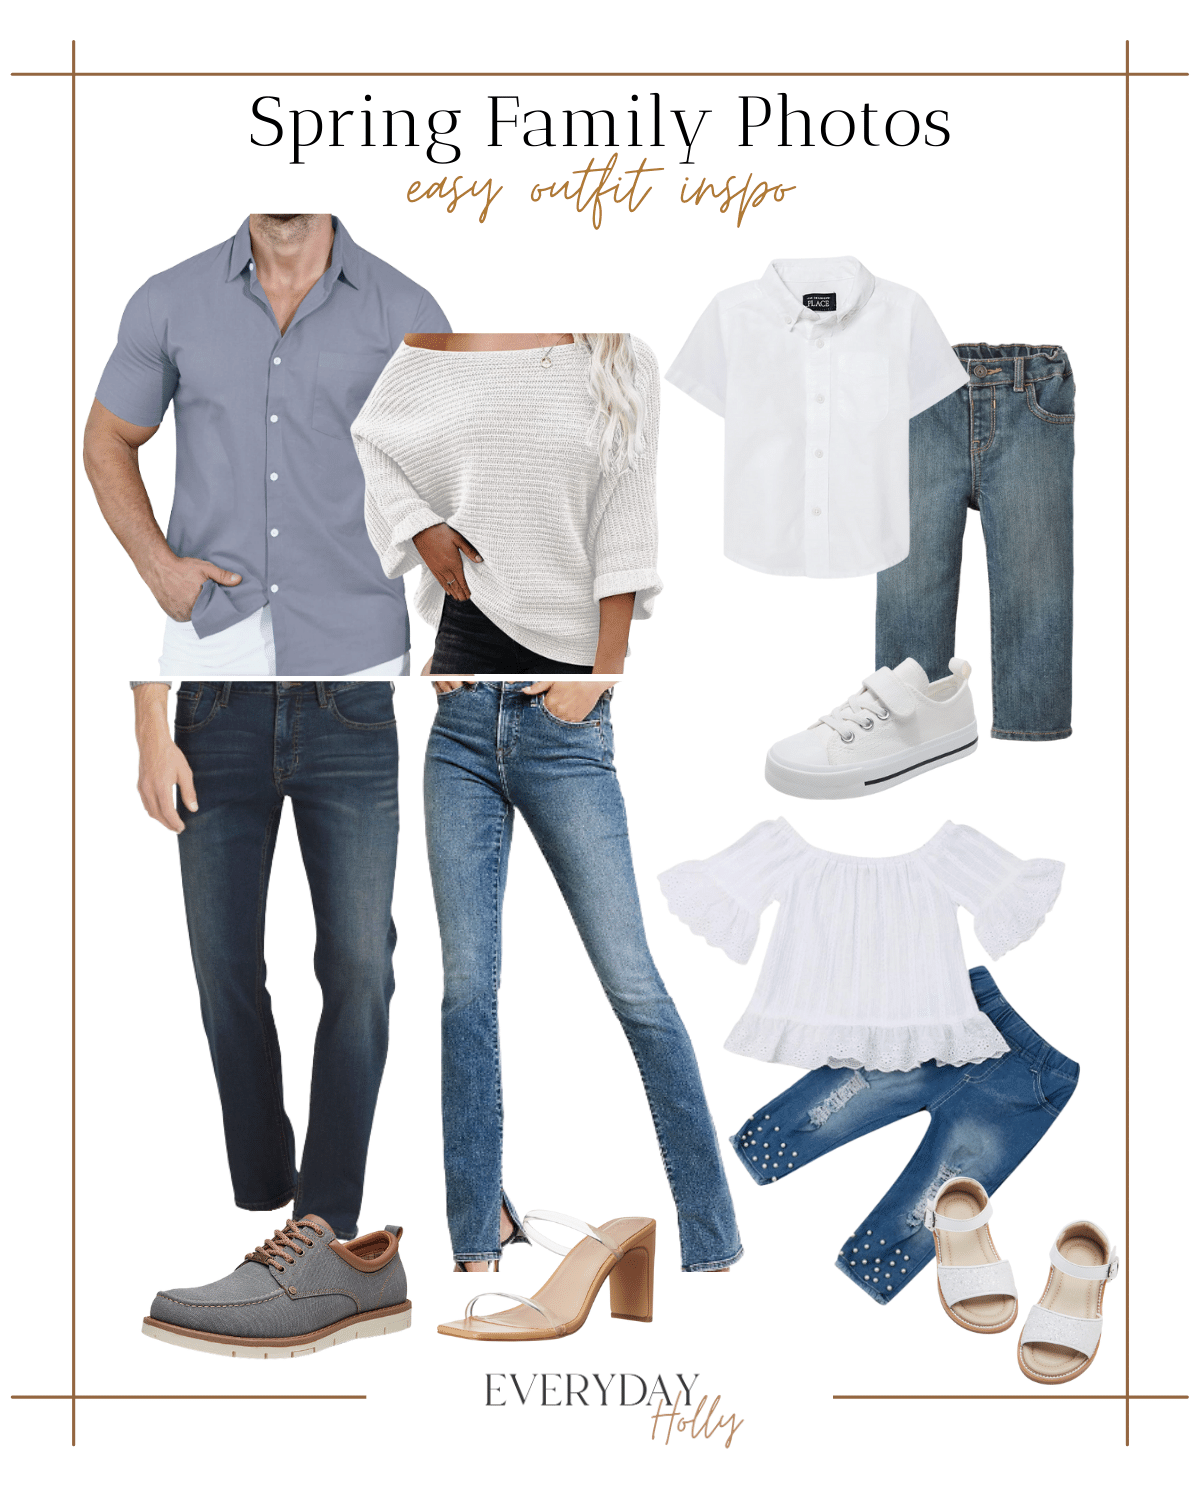 easy family photo outfit inspo, mens jean outfit, mens gray short sleeve button of, mens jeans, womens white sweaters, womens skyscraper jeans, clear strap heels, toddler boys white button up, boys jeans, boys sneakers, girls white to jean outfit, girls white sandals 